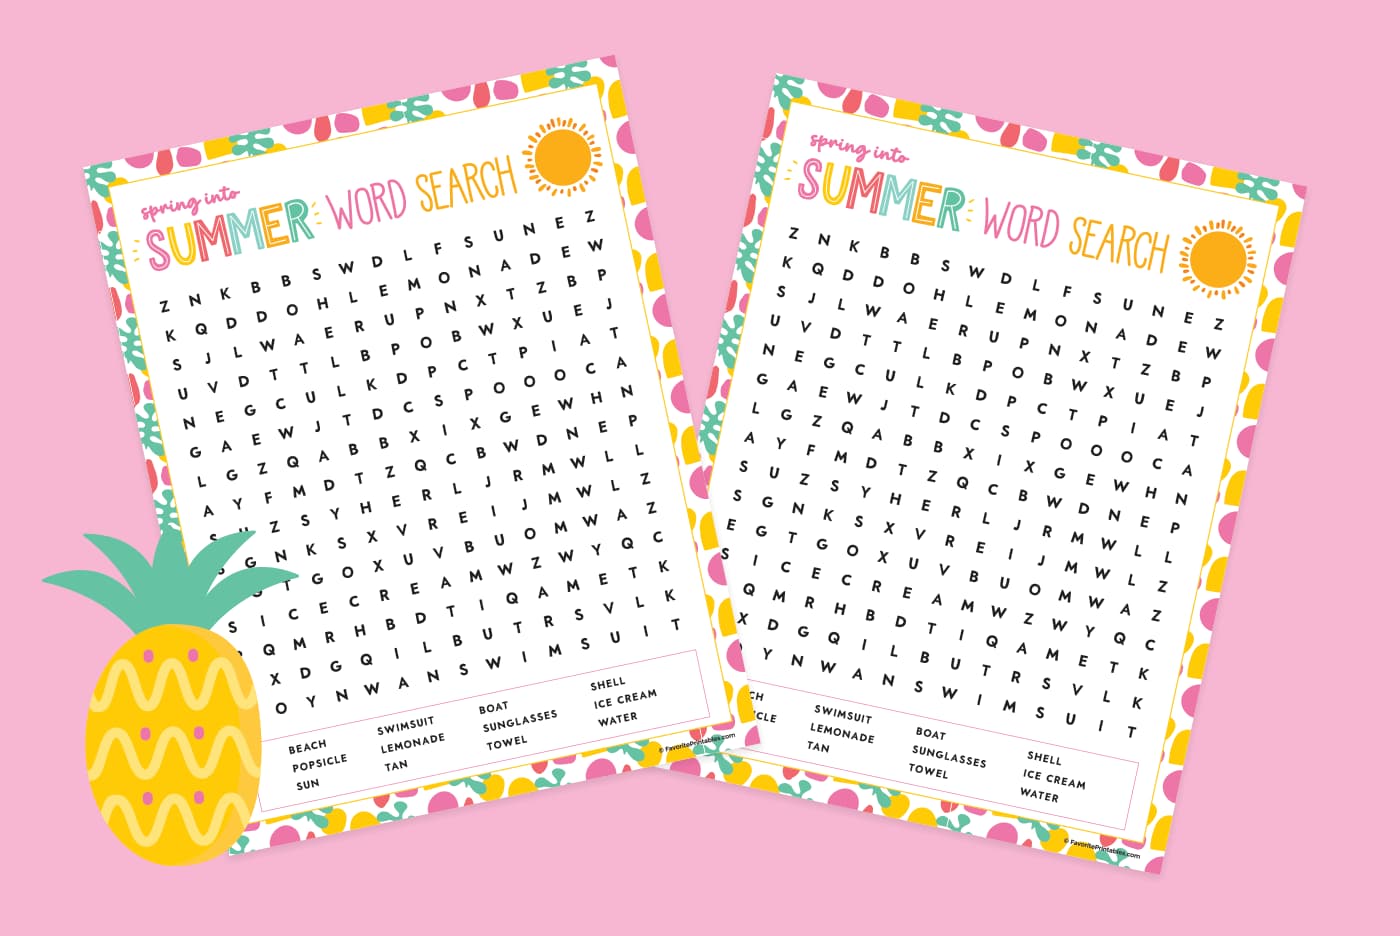 Summer word search printable preview on pink background with pineapple.